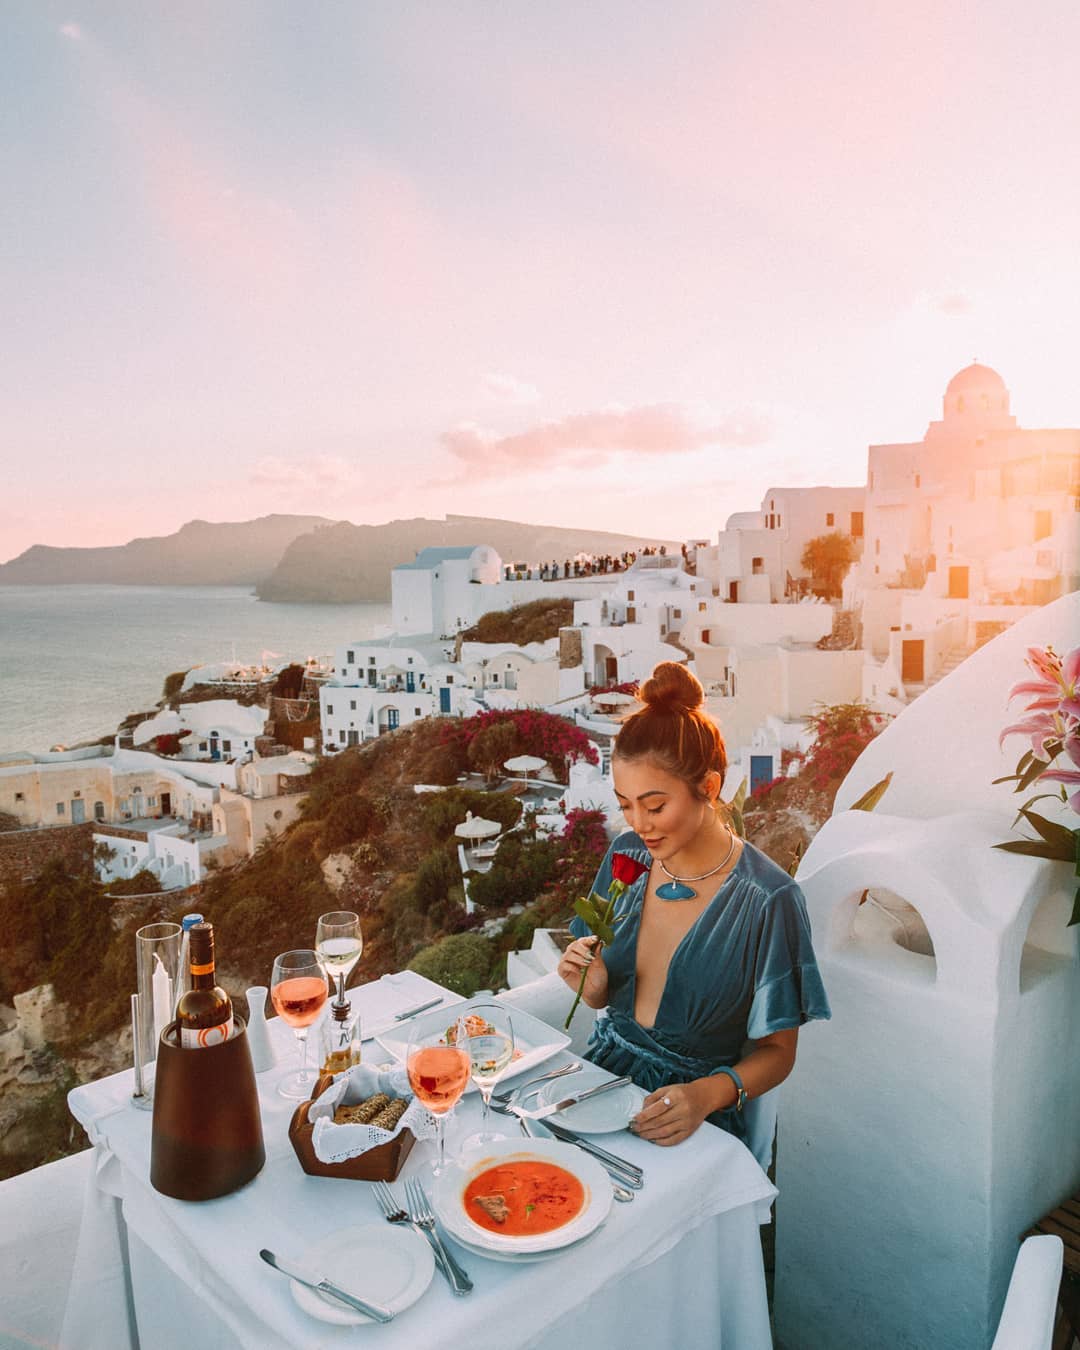 "Couldn't think of better way to enjoy the sunset in Santorini than with dinner and rosé. 🍷"